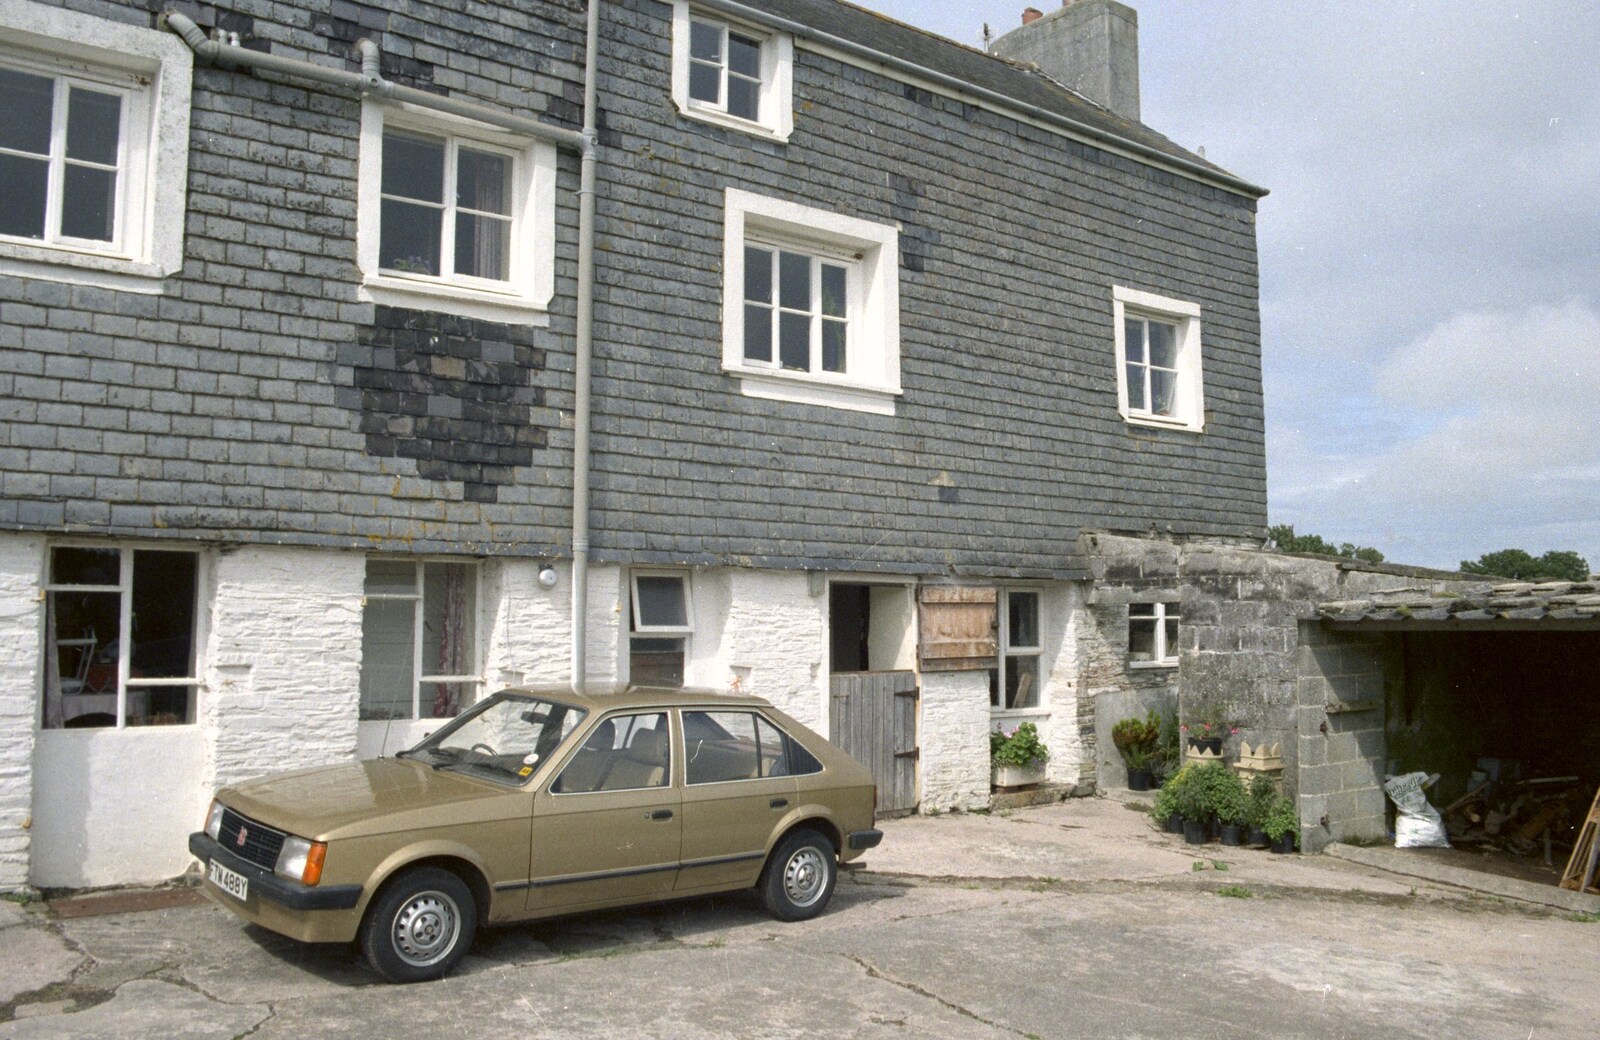 Nosher's beloved car at Pitt Farm from Another Trip to Plymouth and Harbertonford, Devon - 16th August 1992